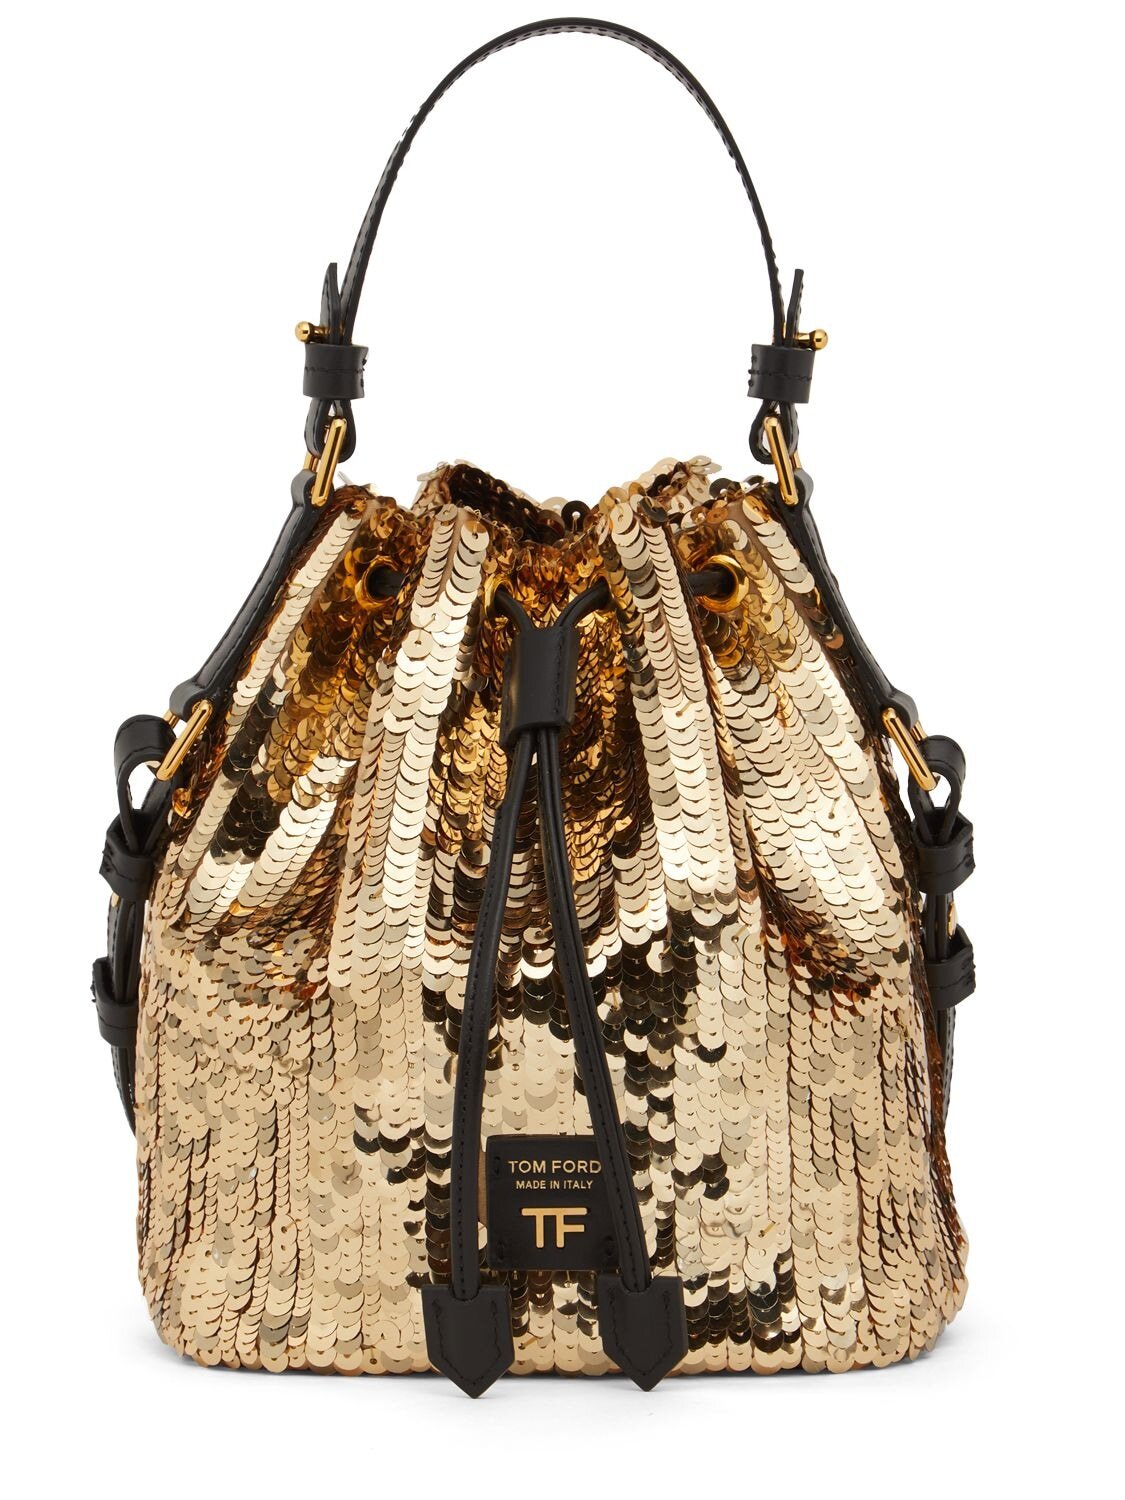 TOM FORD Small Disco Sequined Bucket Bag in black / gold